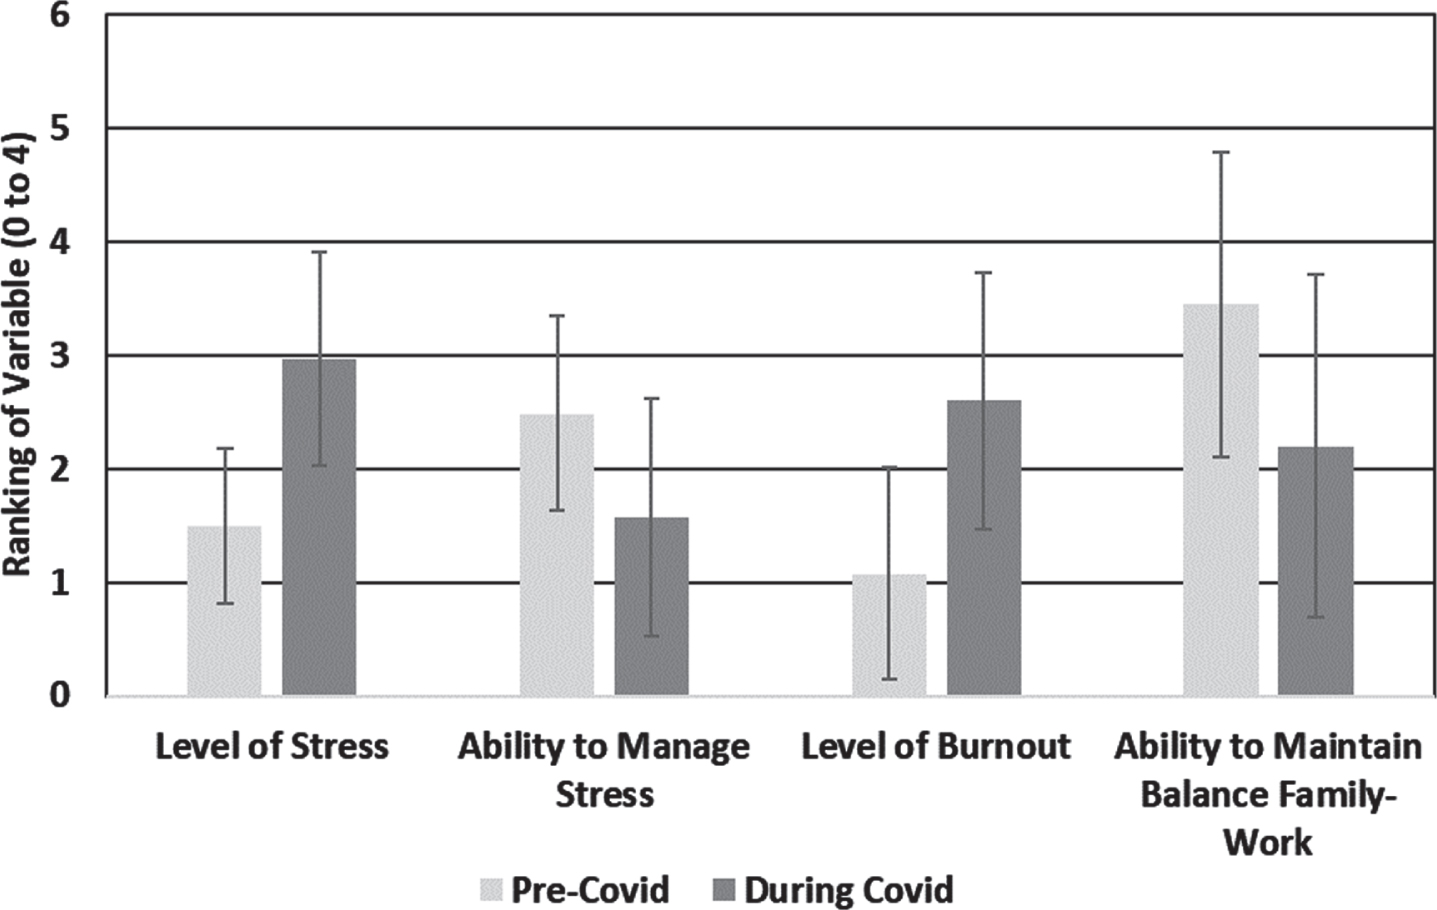 Pre- and during COVID perceptions of stress (Extremely stressed: 4, Very stressed: 3, Somewhat stressed: 2, Slightly stressed: 1, Not at all stressed: 0), Management of stress (Extremely well: 4, Very well: 3, Somewhat well: 2, Slightly well: 1, Not very well: 0), Burnout (Extremely burned out: 4, Very burned out: 3, Somewhat burned out: 2, Slightly burned out: 1, Not at all burned out: 0), Ability to maintain family-work balance (Strongly agree: 5, Moderately agree: 4, Slightly agree: 3, Slightly disagree: 2, Moderately disagree: 1, Strongly disagree: 0). All differences between pre and during are significant at p < 0.05.